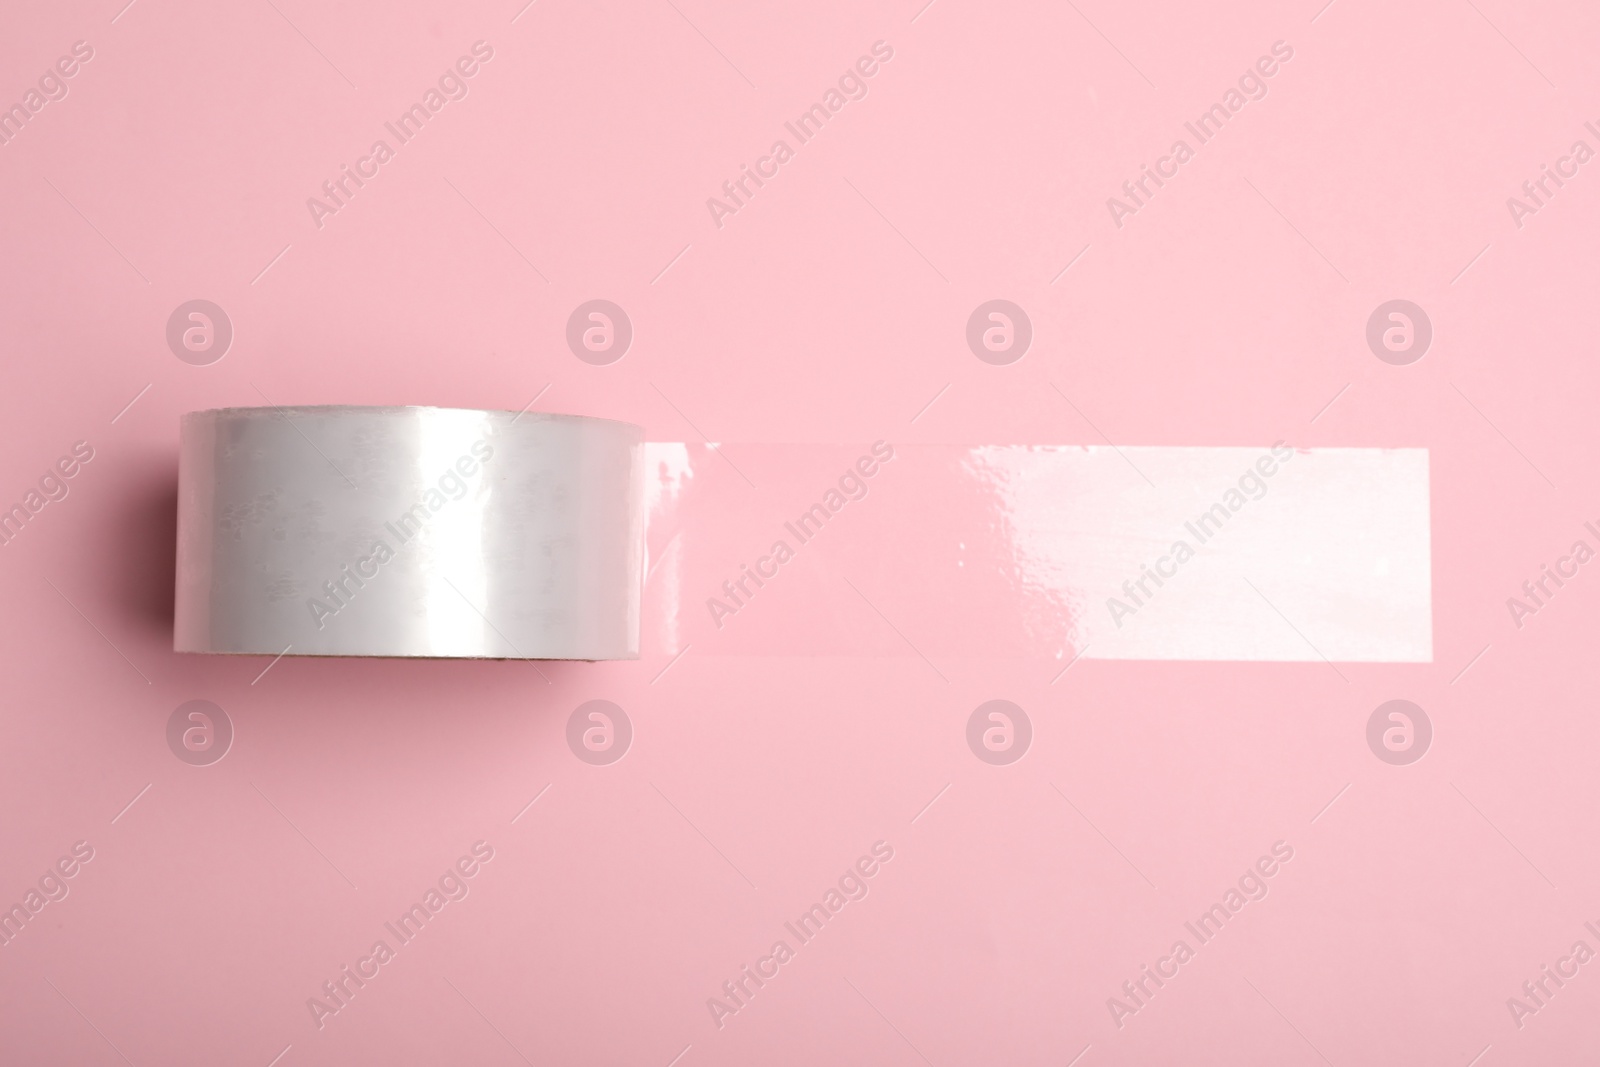 Photo of Roll of adhesive tape on pink background, top view